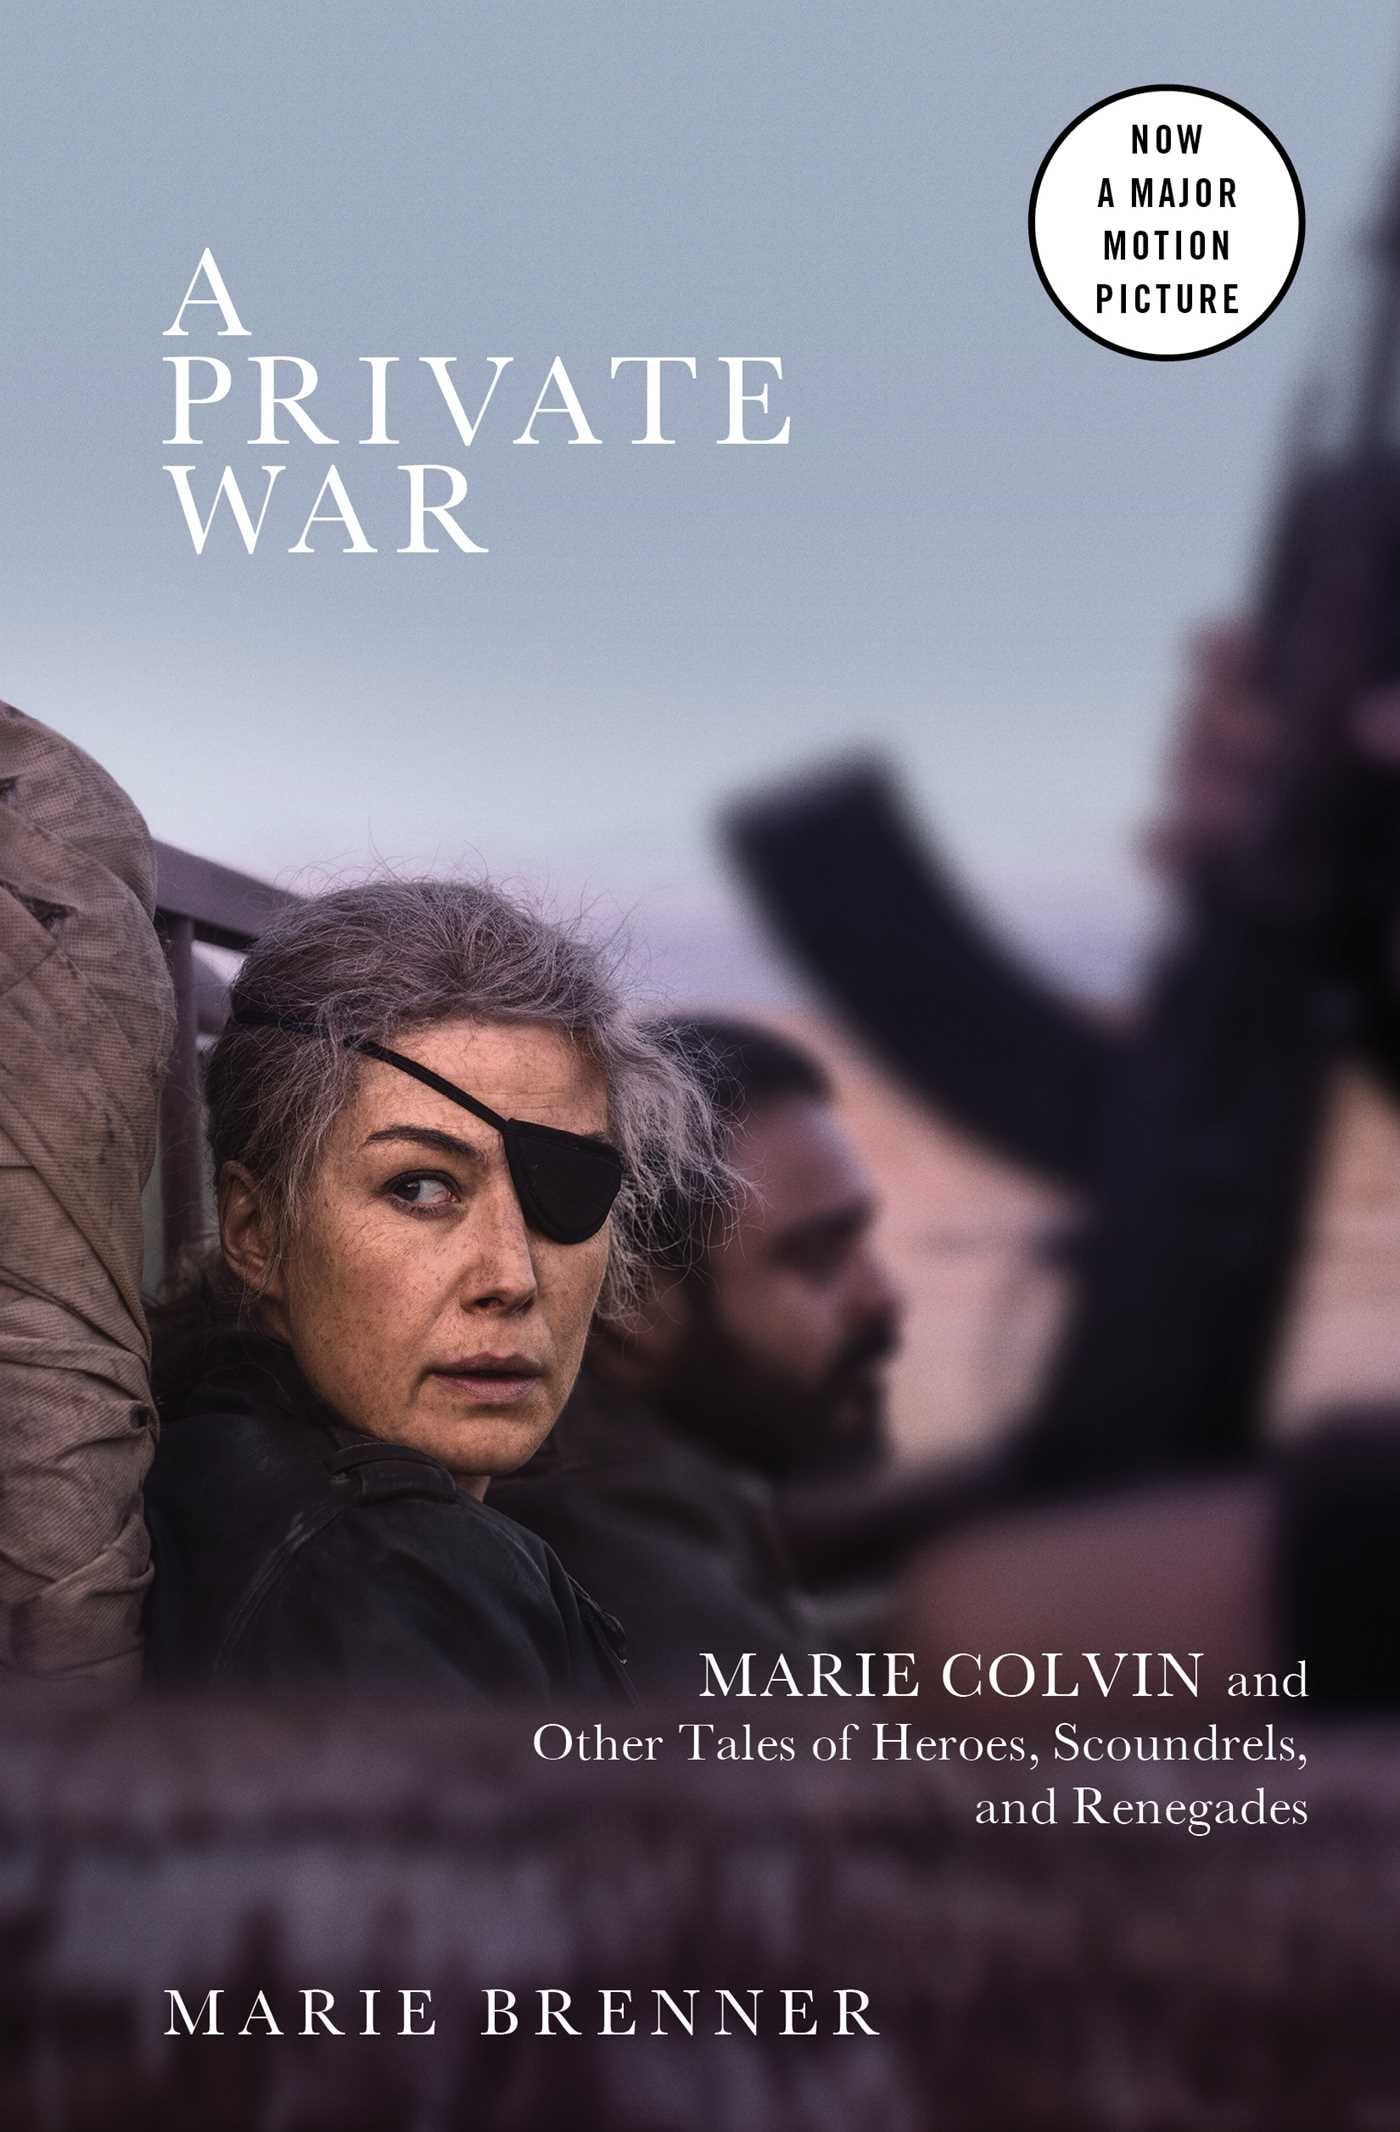 A-Private-War-Marie-Colvin-and-Other-Tales-of-Heroes-Scoundrels-and-Renegades